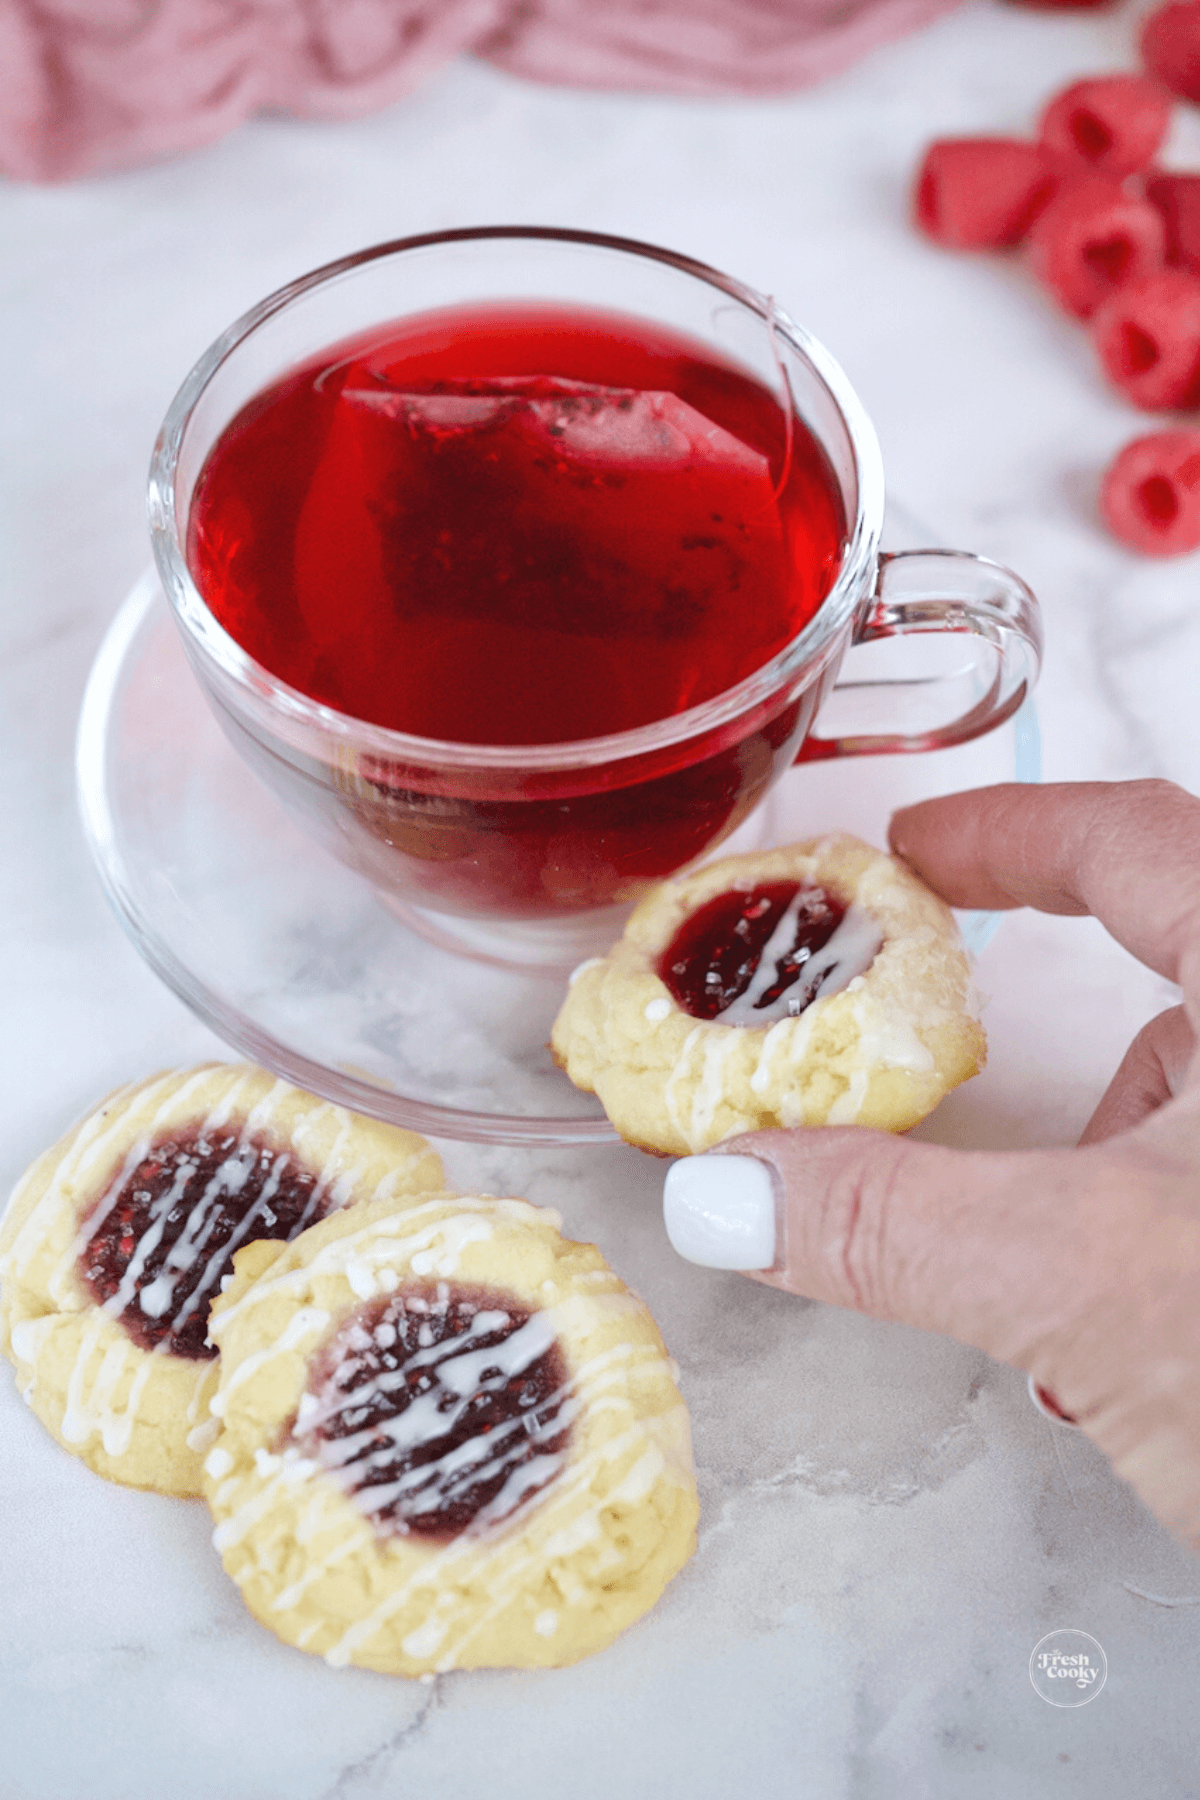 Serving raspberry thumbprint cheesecake cookies with bright red hot cup of tea.